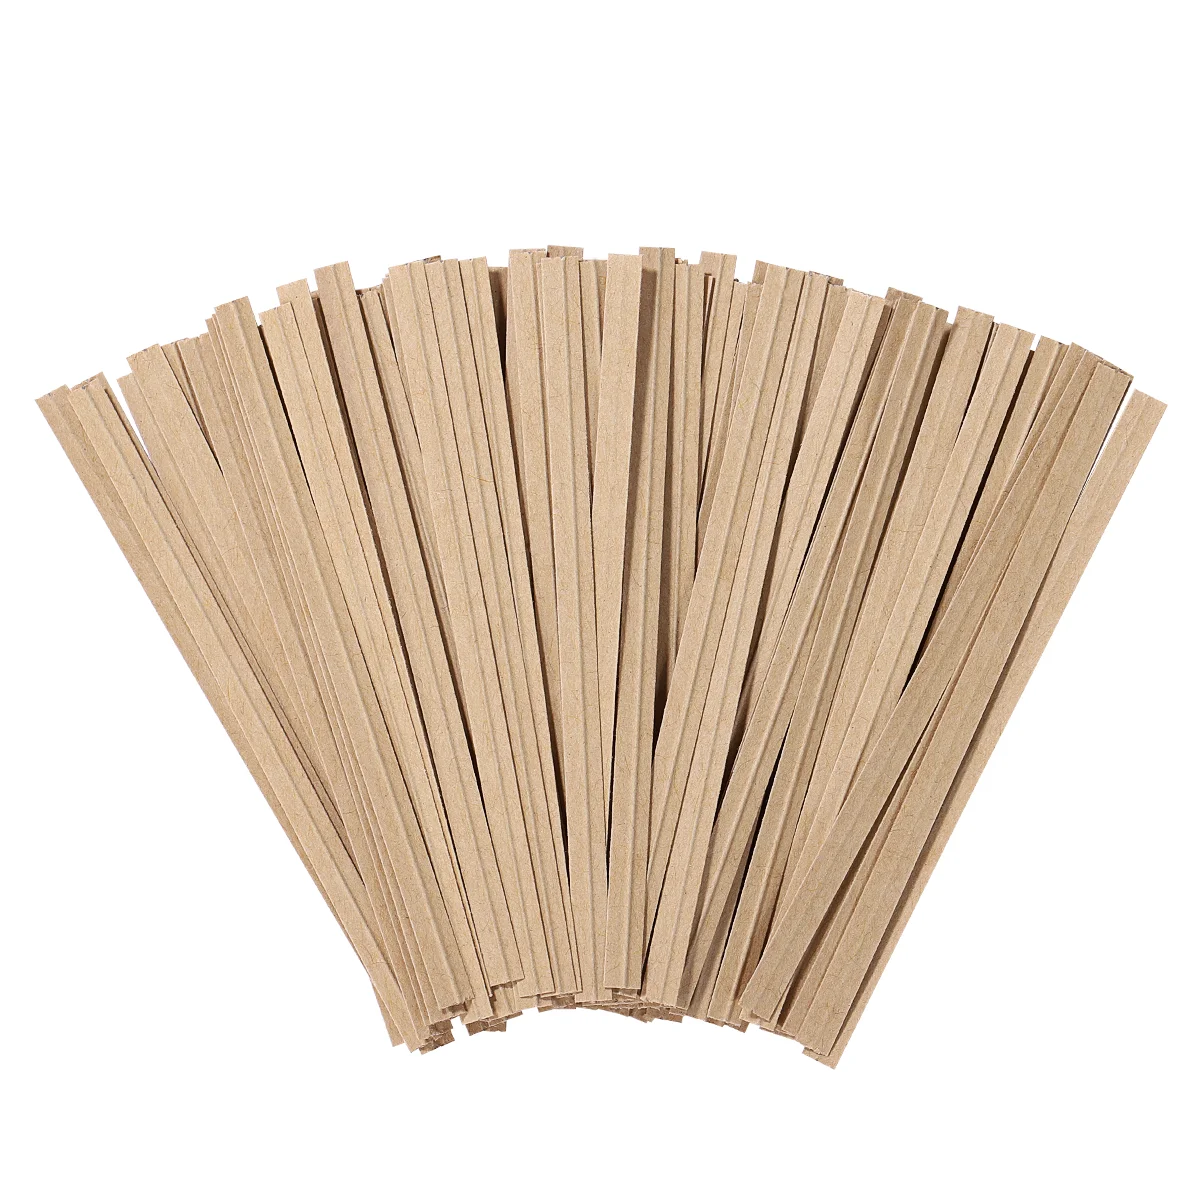 

1000Pcs 8cm Kraft Paper Ties Reusable Bread Ties for Party Cello Candy Bread Coffee Bags Cake Pops